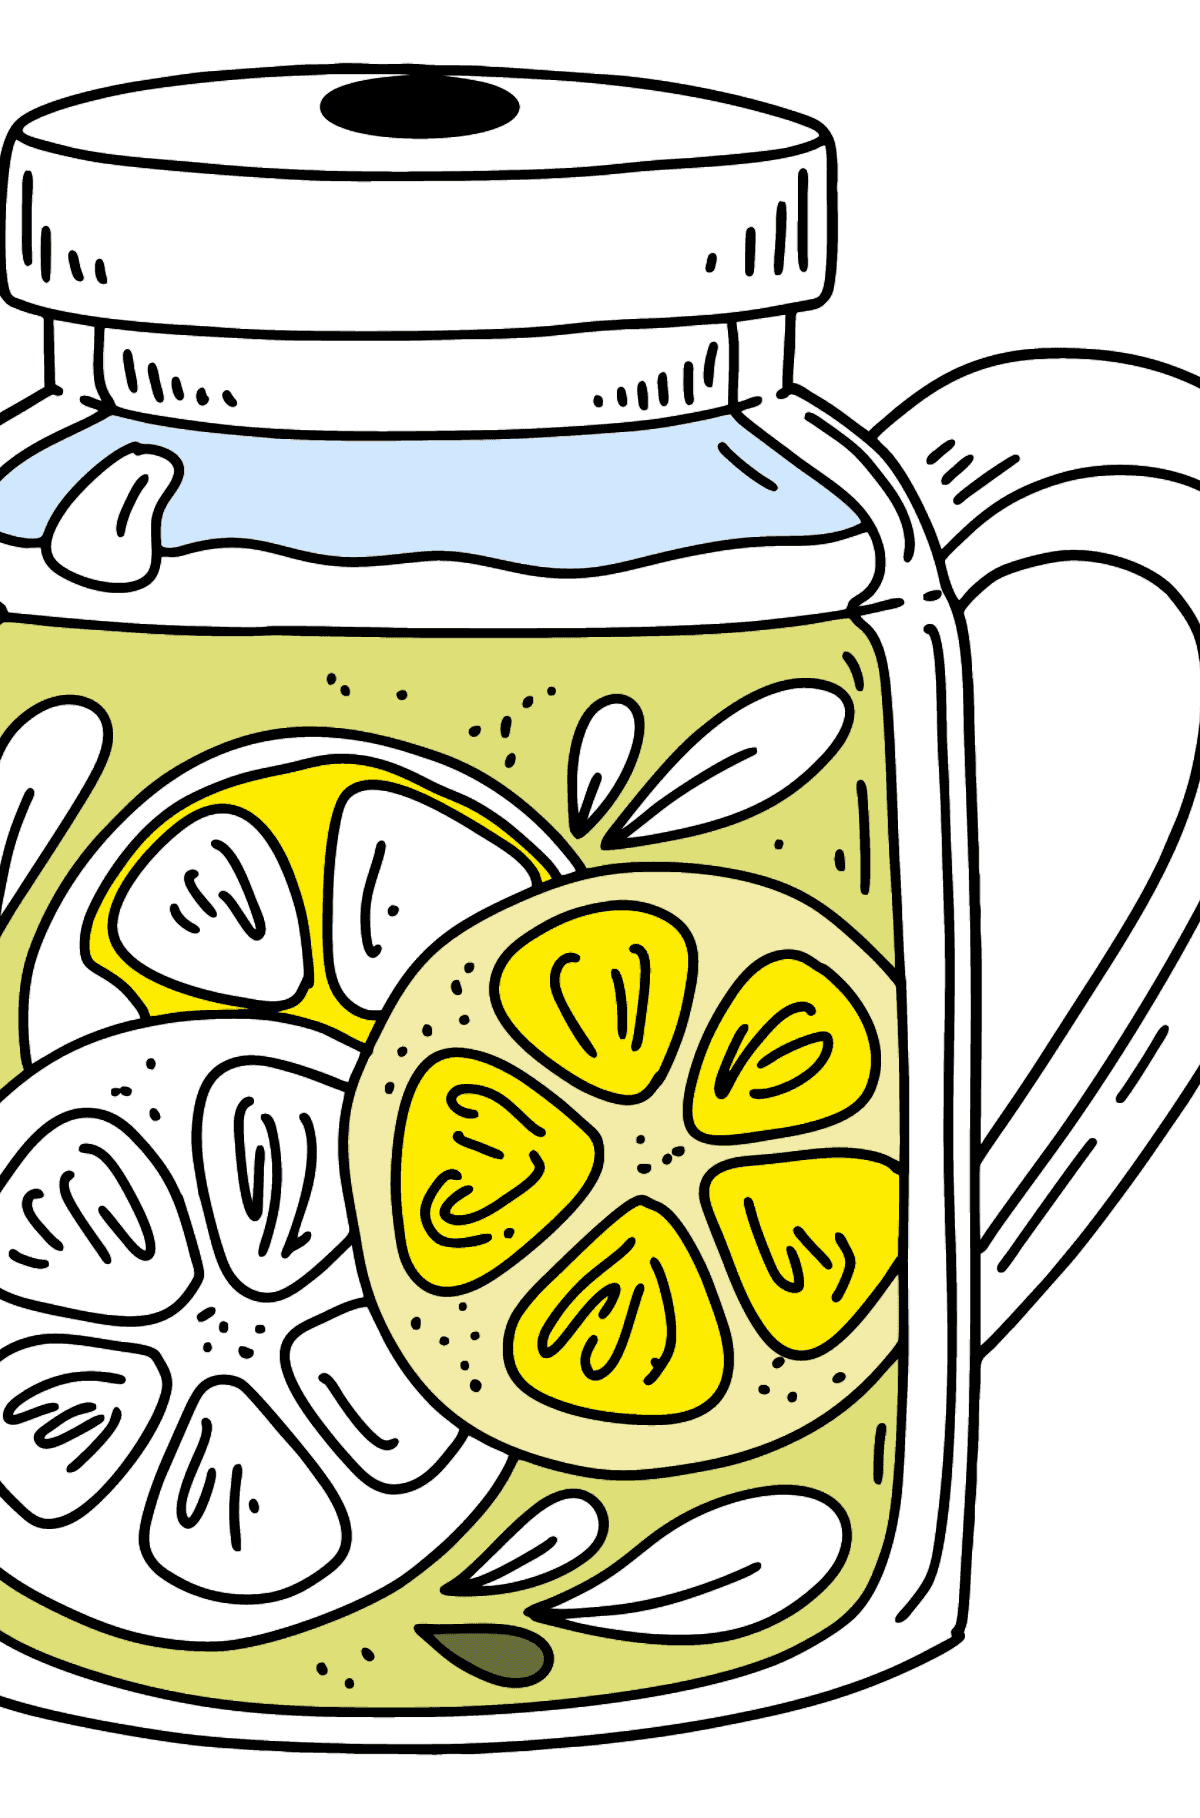 Delicious Lemonade coloring page - Coloring Pages for Kids